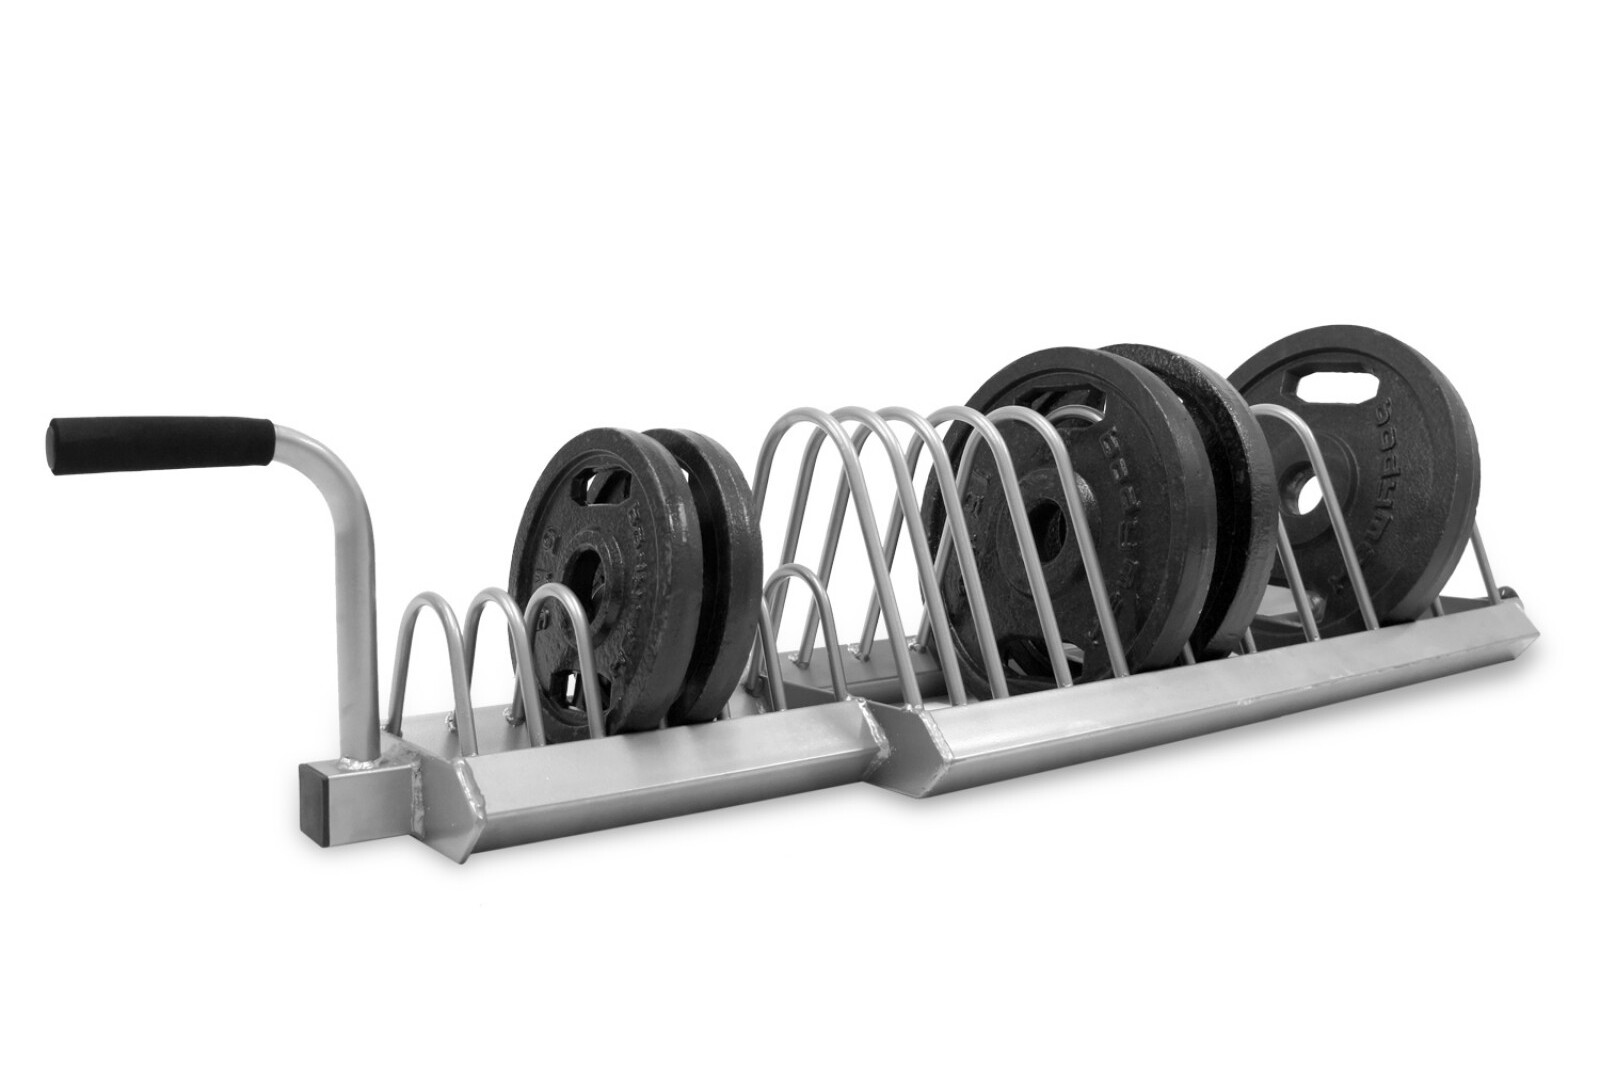 How To Store Weight Plates